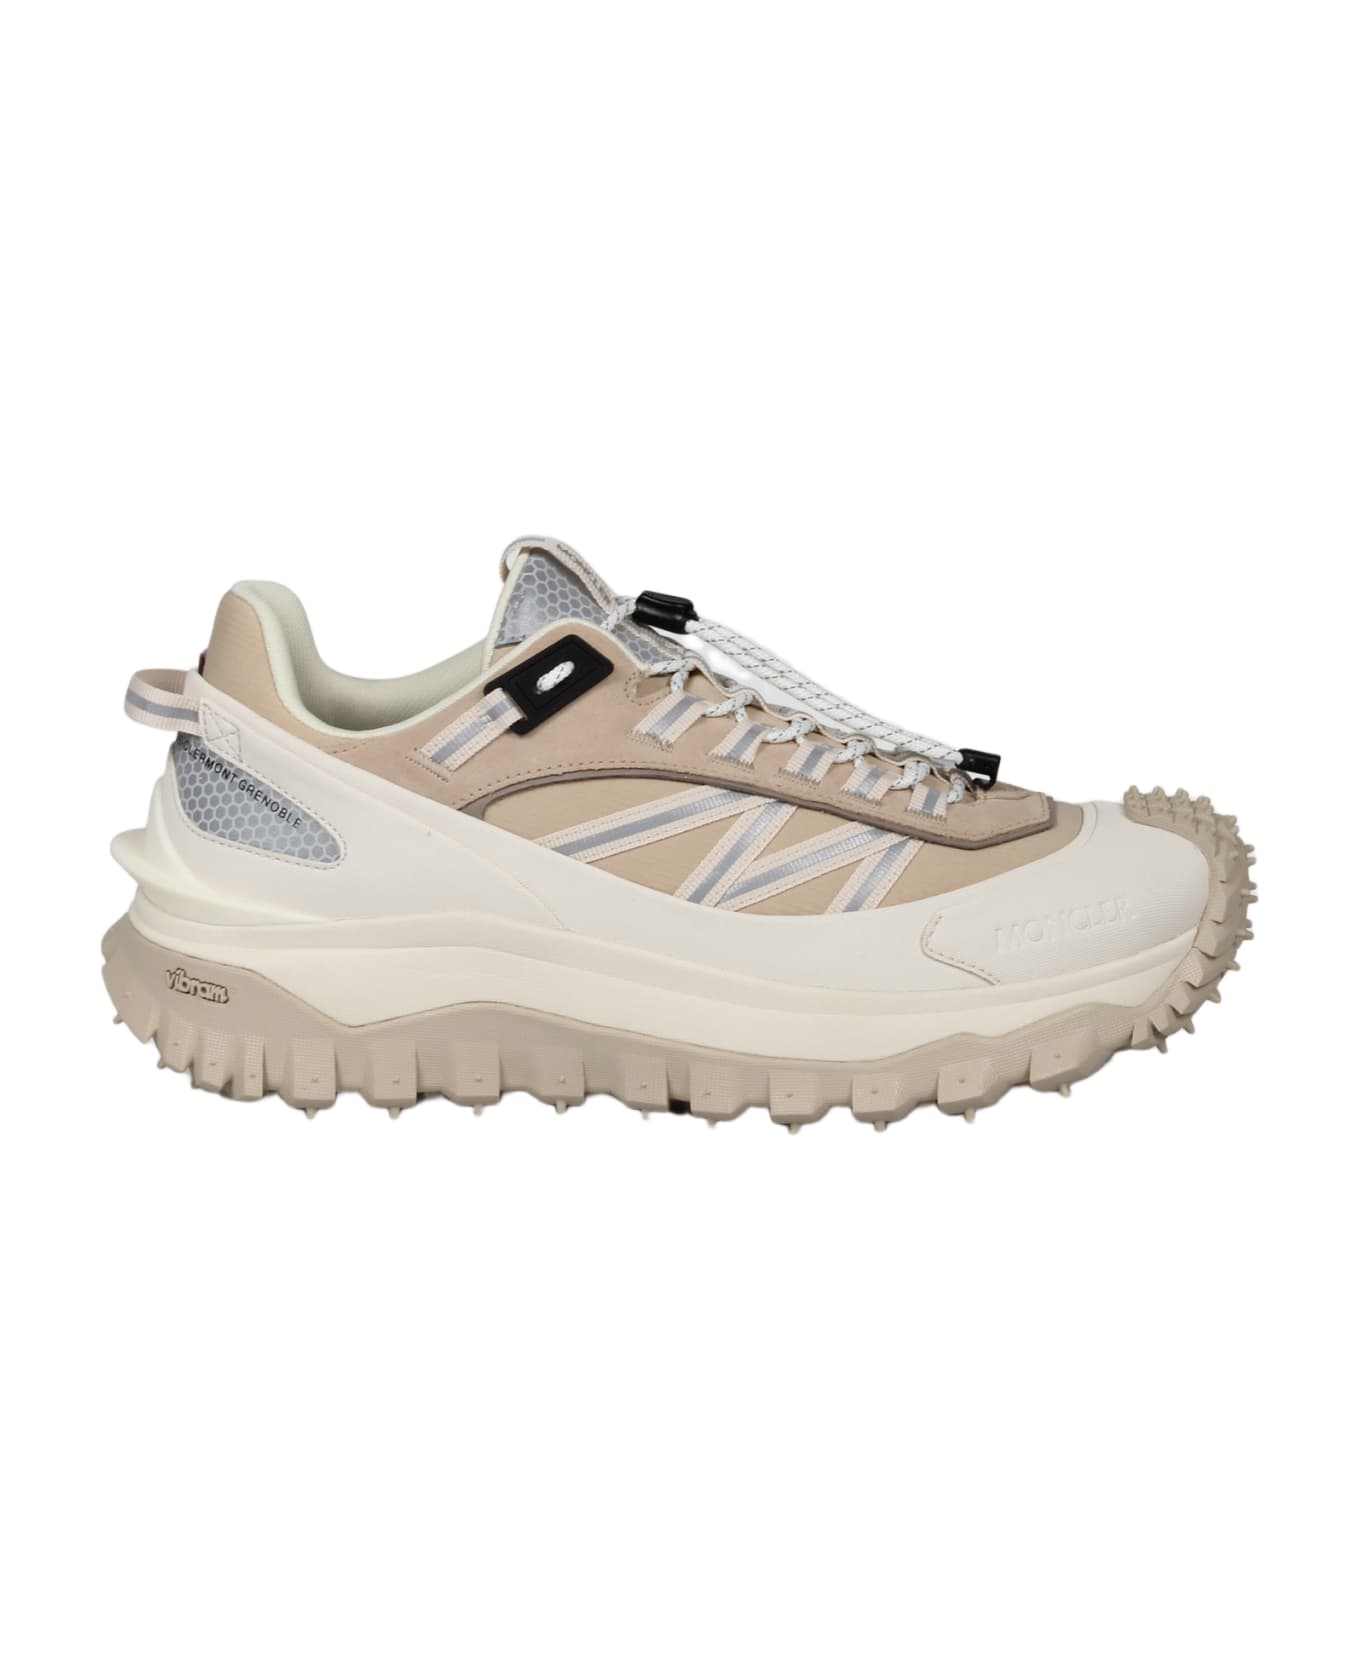 Moncler Trailgrip Sneakers - Nude & Neutrals